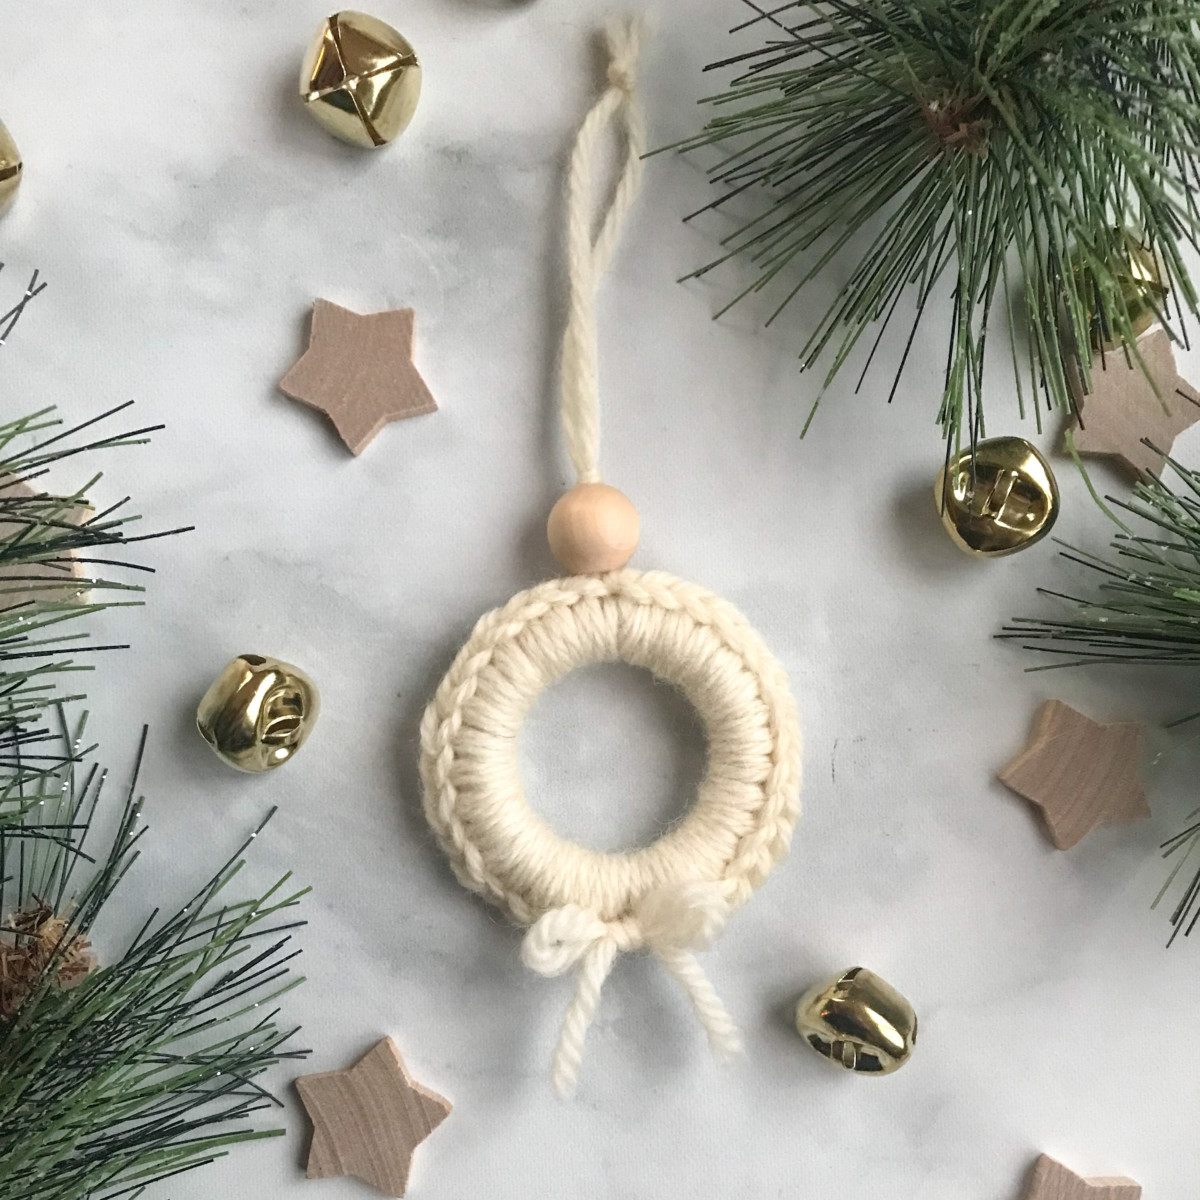 mini wreath ornament with stars around it on a white background